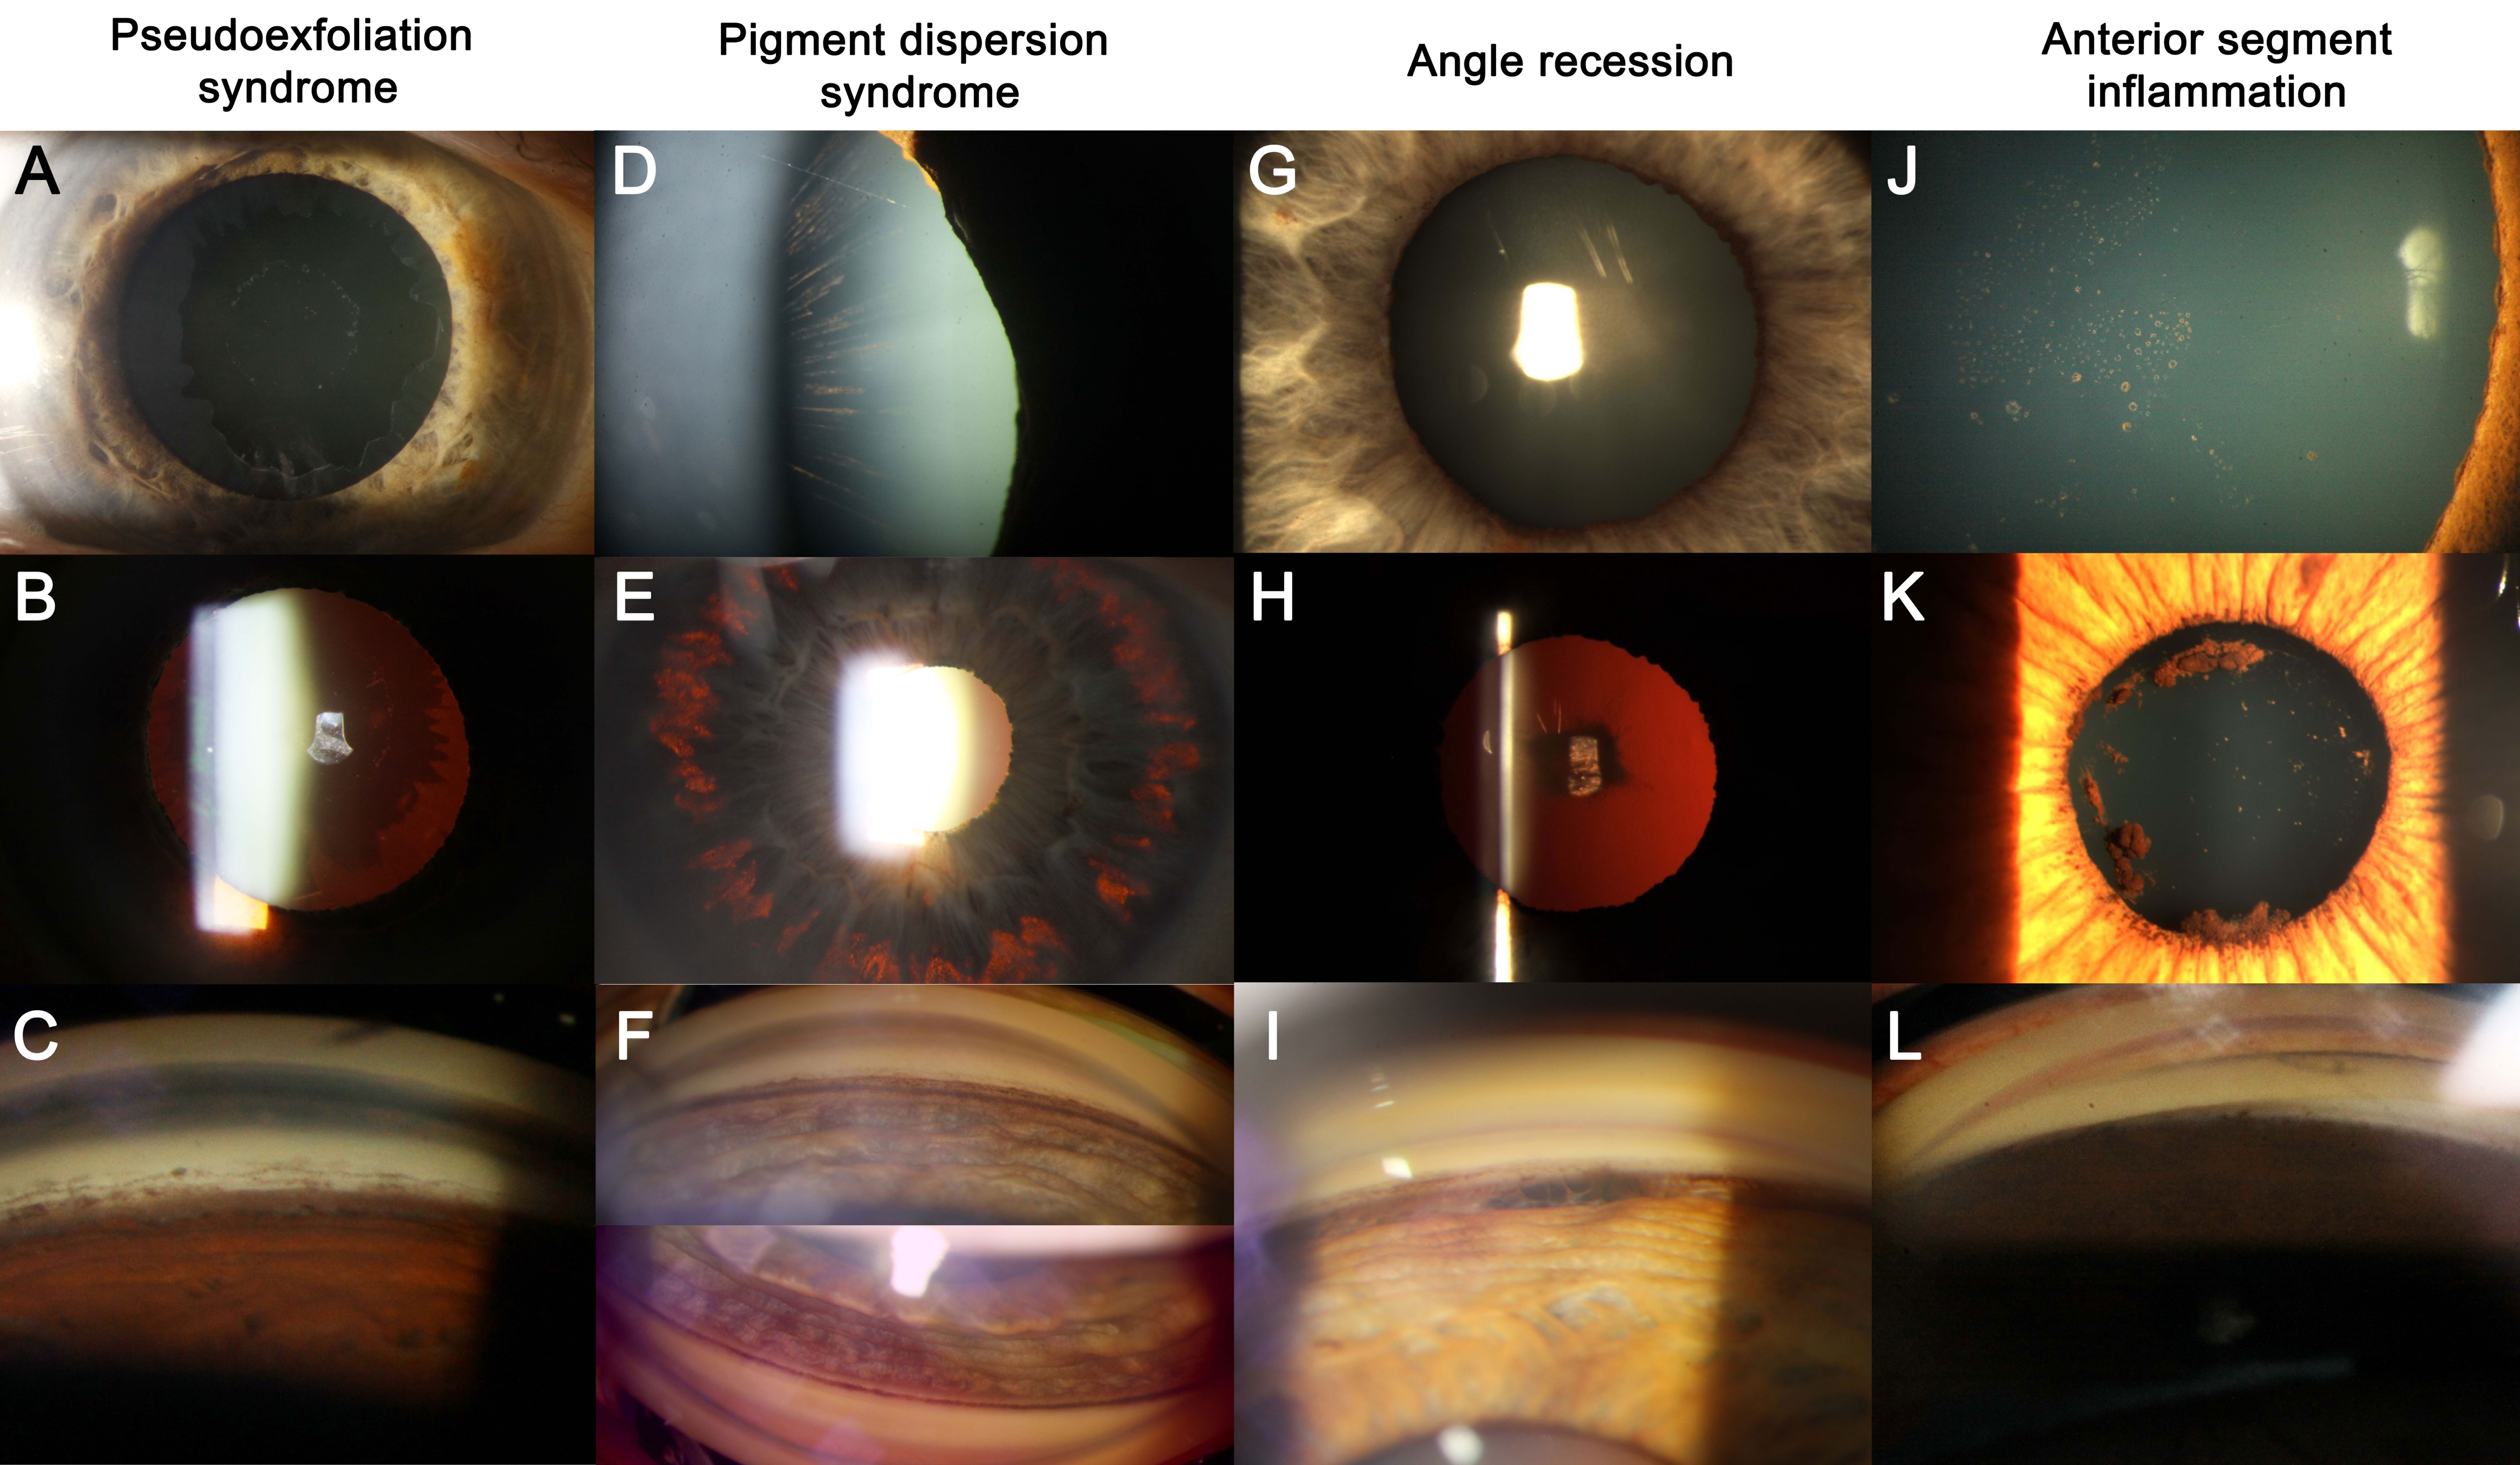 The slit lamp biomicroscopic and gonioscopic findings of psuedoexfoliation syndrome (A-C), pigment dispersion syndrome (D-F), angle recession (G-I) and anterior segment inflammation (J-L). (A) Extracellular material deposition in a double concentric bull’s eye pattern. (B) Transillumination view of the bull’s eye pattern. (C) Increased but patchy pigmentation of trabecular meshwork on gonioscopy. (D) Radial anterior lens surface pigment deposition. (E) Mid-peripheral iris transillumination defects. (F) Homogenous increased hyperpigmentation of the trabecular meshwork on gonioscopy. (G) Loss of the pupillary ruff. (H) Transillumination view of a traumatic cataract. (I) Angle recession on gonioscopy. (J) Pigmentation on the anterior surface of the lens capsule associated with a history of anterior uveitis. (K) Larger agglomerates of pigment on the anterior lens capsule surface suggestive of broken posterior synechiae. (L) Peripheral anterior synechiae with focal narrowing of the angle.